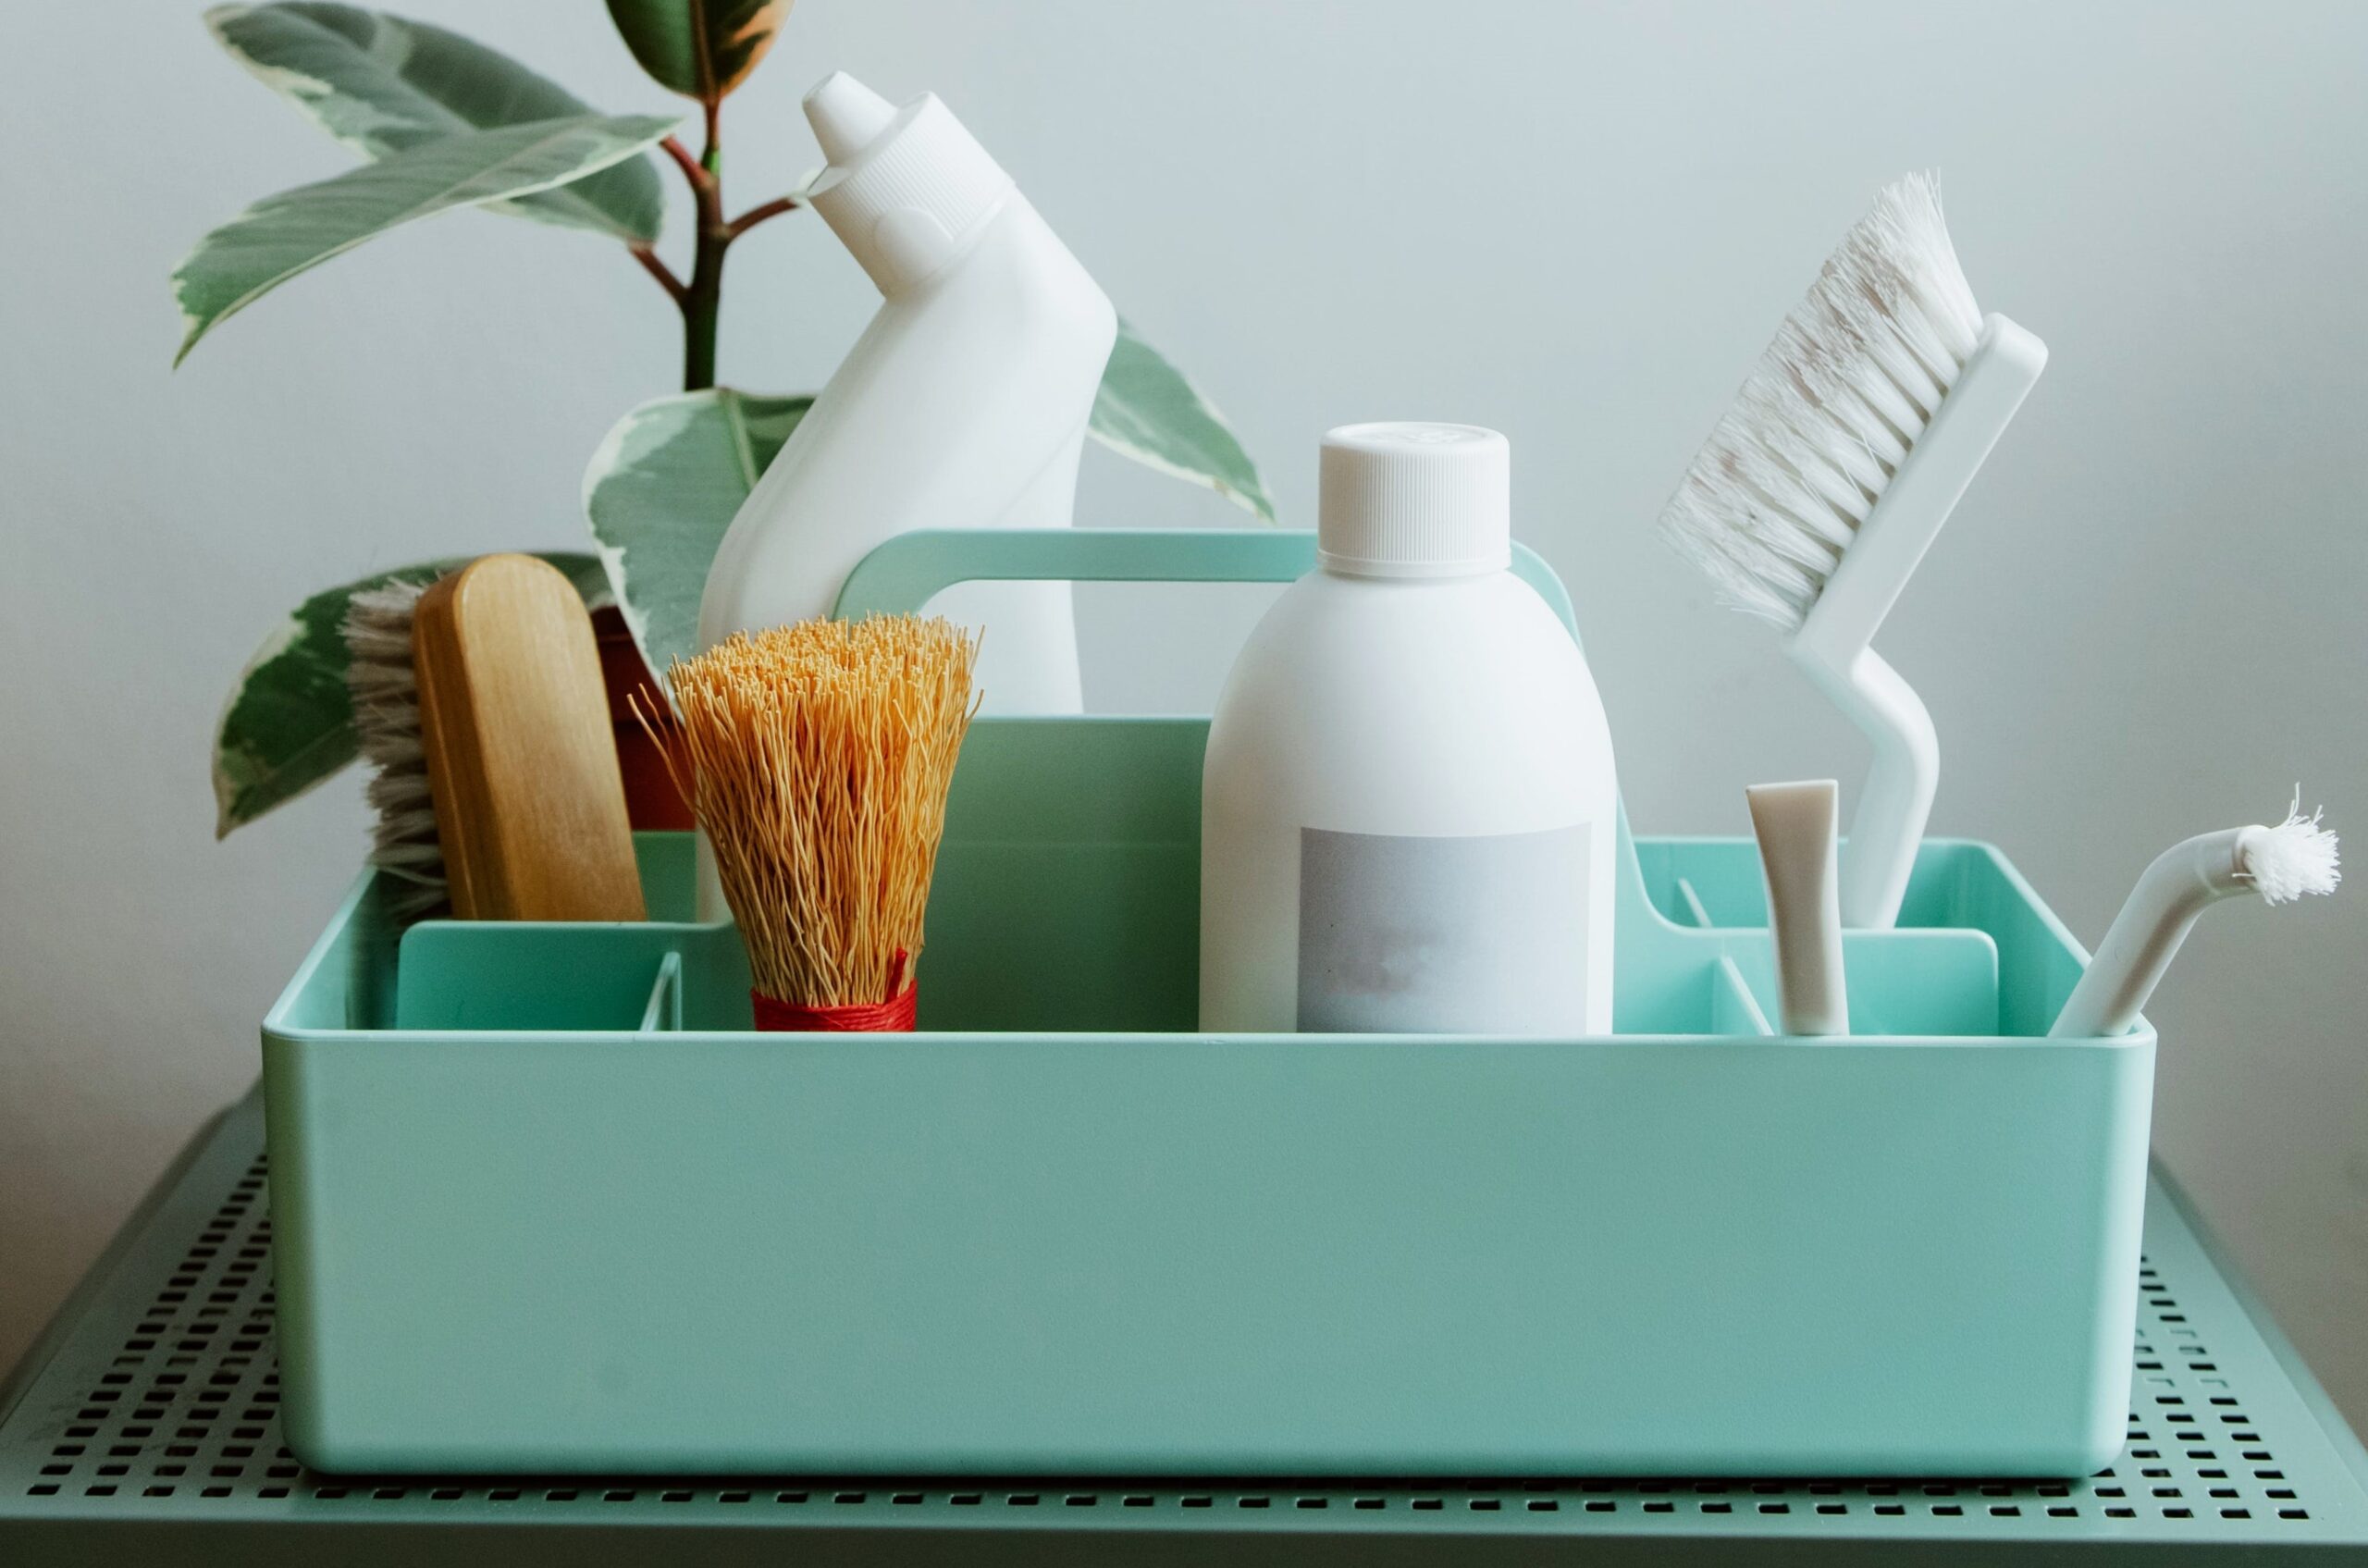 Putting together a kit of cleaning products and tools is a great way to kick off your Spring Cleaning project.